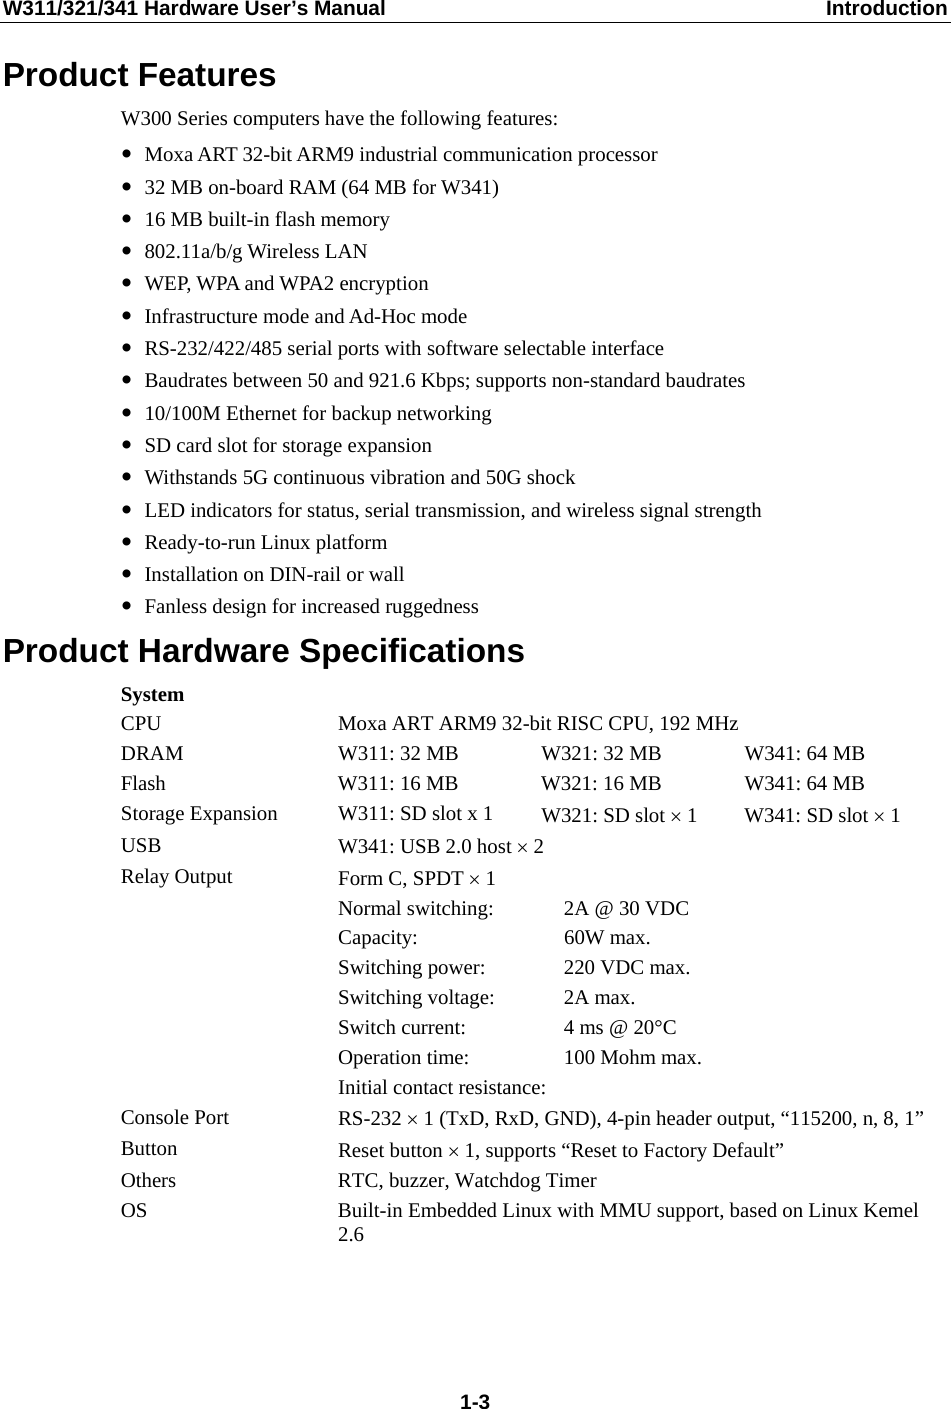 W311/321/341 Hardware User’s Manual  Introduction Product Features W300 Series computers have the following features: y Moxa ART 32-bit ARM9 industrial communication processor y 32 MB on-board RAM (64 MB for W341) y 16 MB built-in flash memory y 802.11a/b/g Wireless LAN y WEP, WPA and WPA2 encryption y Infrastructure mode and Ad-Hoc mode y RS-232/422/485 serial ports with software selectable interface y Baudrates between 50 and 921.6 Kbps; supports non-standard baudrates y 10/100M Ethernet for backup networking y SD card slot for storage expansion   y Withstands 5G continuous vibration and 50G shock y LED indicators for status, serial transmission, and wireless signal strength y Ready-to-run Linux platform y Installation on DIN-rail or wall y Fanless design for increased ruggedness Product Hardware Specifications System CPU  Moxa ART ARM9 32-bit RISC CPU, 192 MHz DRAM  W311: 32 MB  W321: 32 MB  W341: 64 MB Flash  W311: 16 MB  W321: 16 MB  W341: 64 MB Storage Expansion  W311: SD slot x 1  W321: SD slot × 1  W341: SD slot × 1 USB  W341: USB 2.0 host × 2 Relay Output  Form C, SPDT × 1   Normal switching:  2A @ 30 VDC  Capacity: 60W max.   Switching power:  220 VDC max.  Switching voltage: 2A max.   Switch current:  4 ms @ 20°C   Operation time:  100 Mohm max.   Initial contact resistance:  Console Port  RS-232 × 1 (TxD, RxD, GND), 4-pin header output, “115200, n, 8, 1” Button  Reset button × 1, supports “Reset to Factory Default” Others  RTC, buzzer, Watchdog Timer OS  Built-in Embedded Linux with MMU support, based on Linux Kemel 2.6     1-3